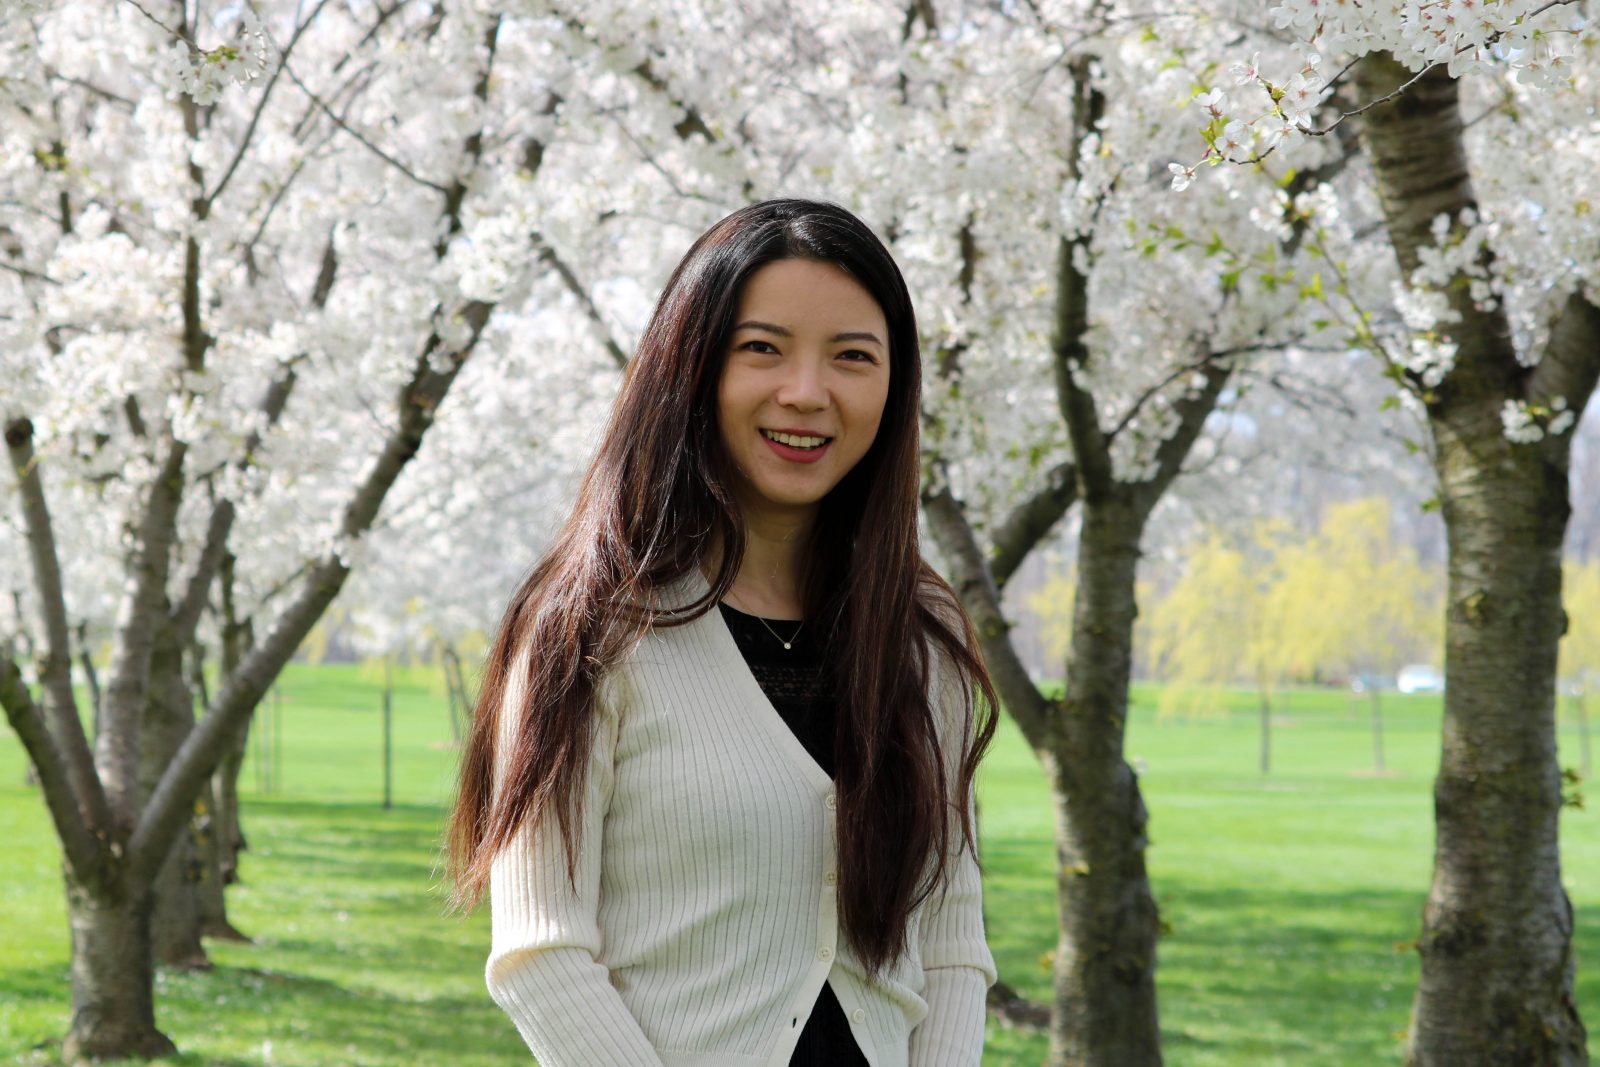 A woman stands in front of two rows of blooming cherry blossom trees.